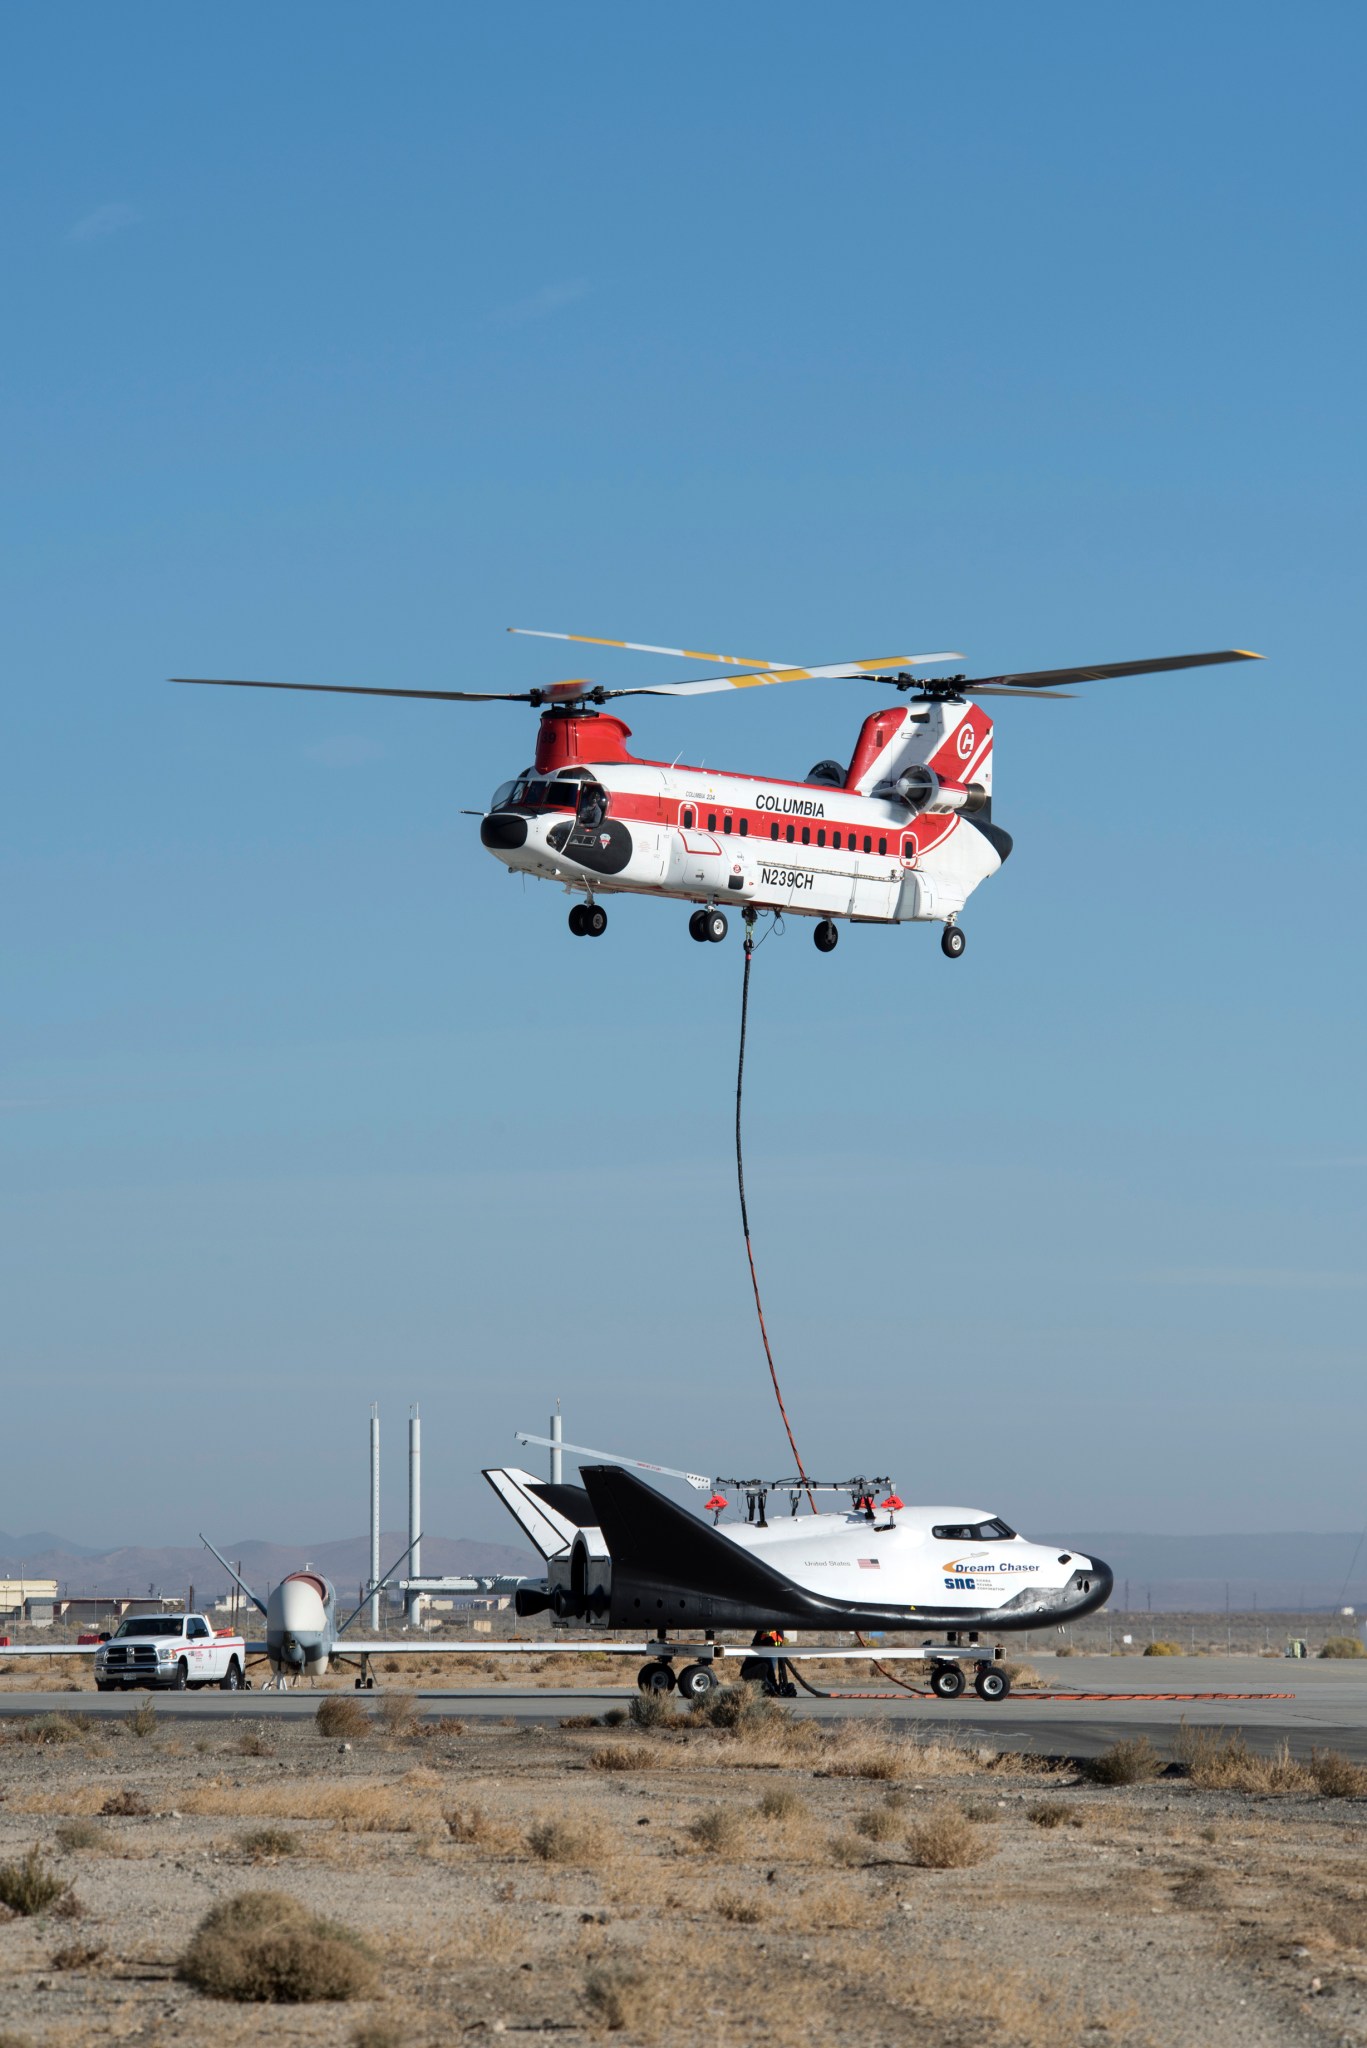 Sierra Nevada Corp?s Dream Chaser was lifted by helicopter from the ramp at NASA?s Armstrong Flight Research Center.